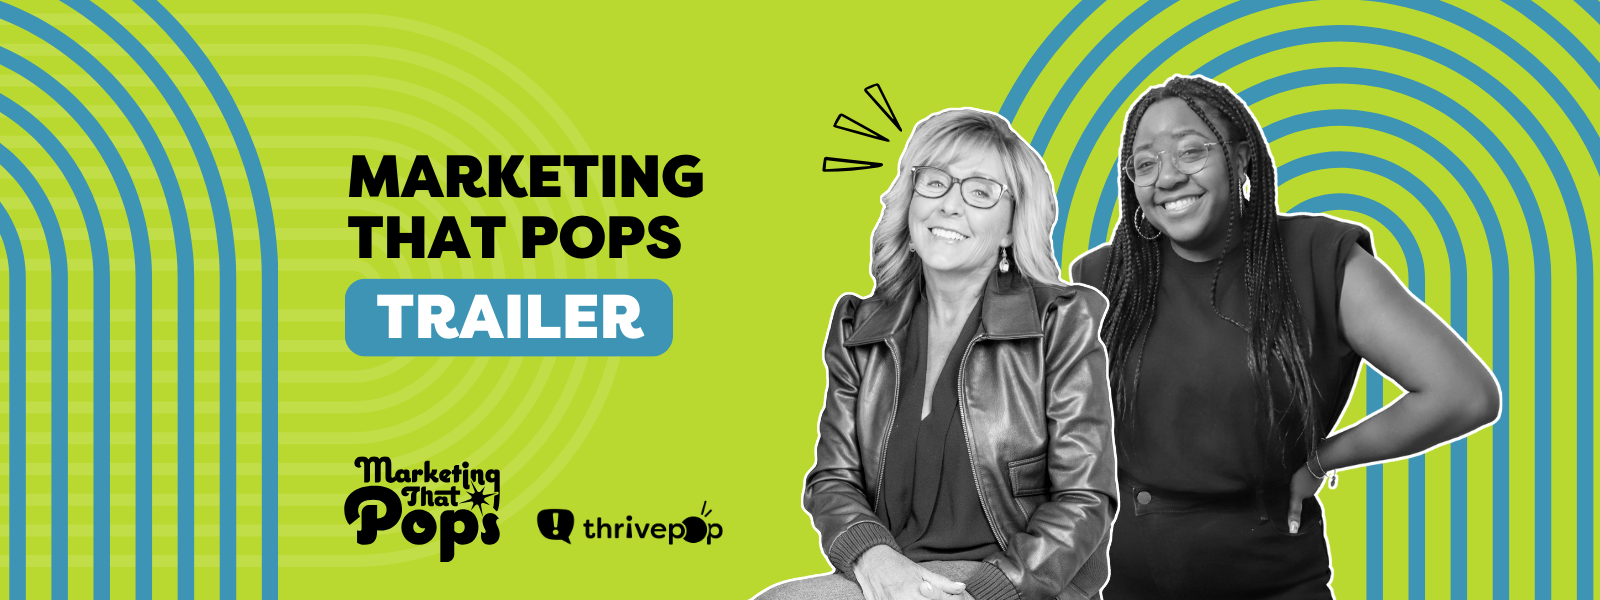 Welcome to Marketing That POPs: A Podcast for Inspiring Business Growth